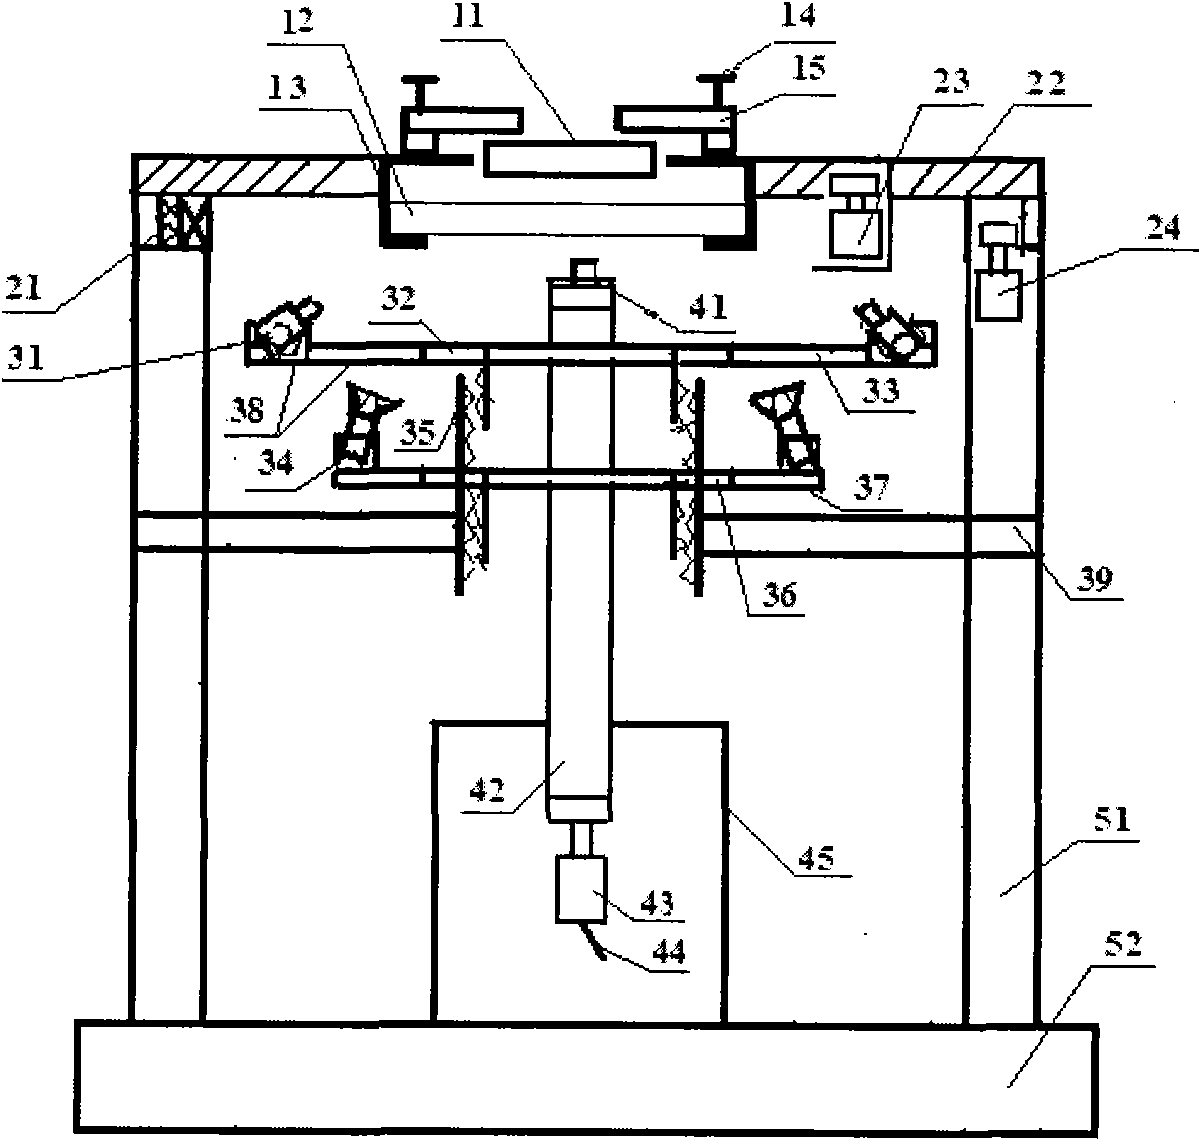 Device and method for analyzing fiber composition content in fabrics